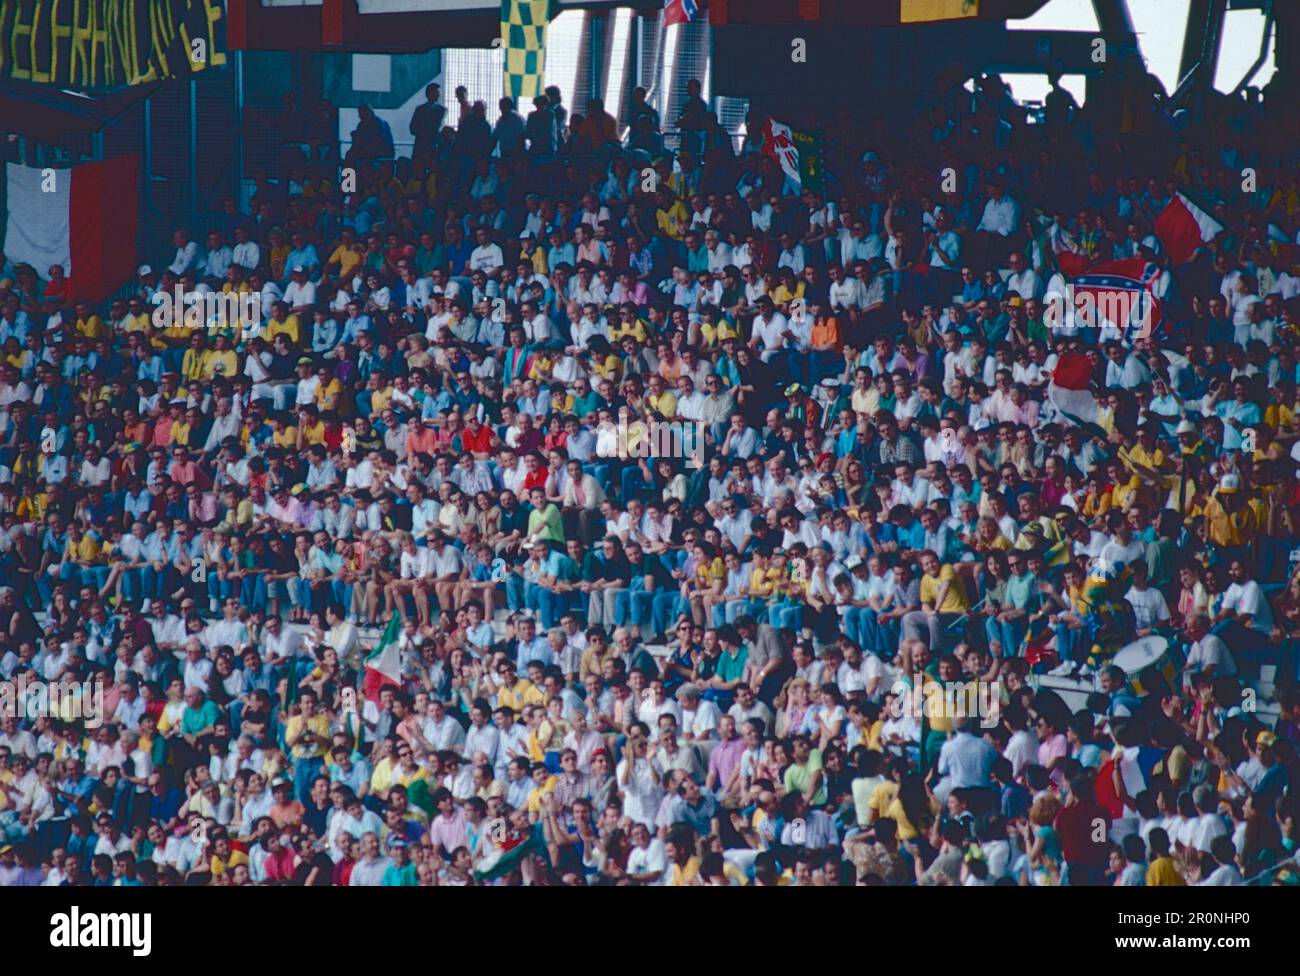 The supporters, Costa Rica and Brazil national football teams play for the World Championship, Delle Alpi Stadium, Torino, Italy 1990 Stock Photo